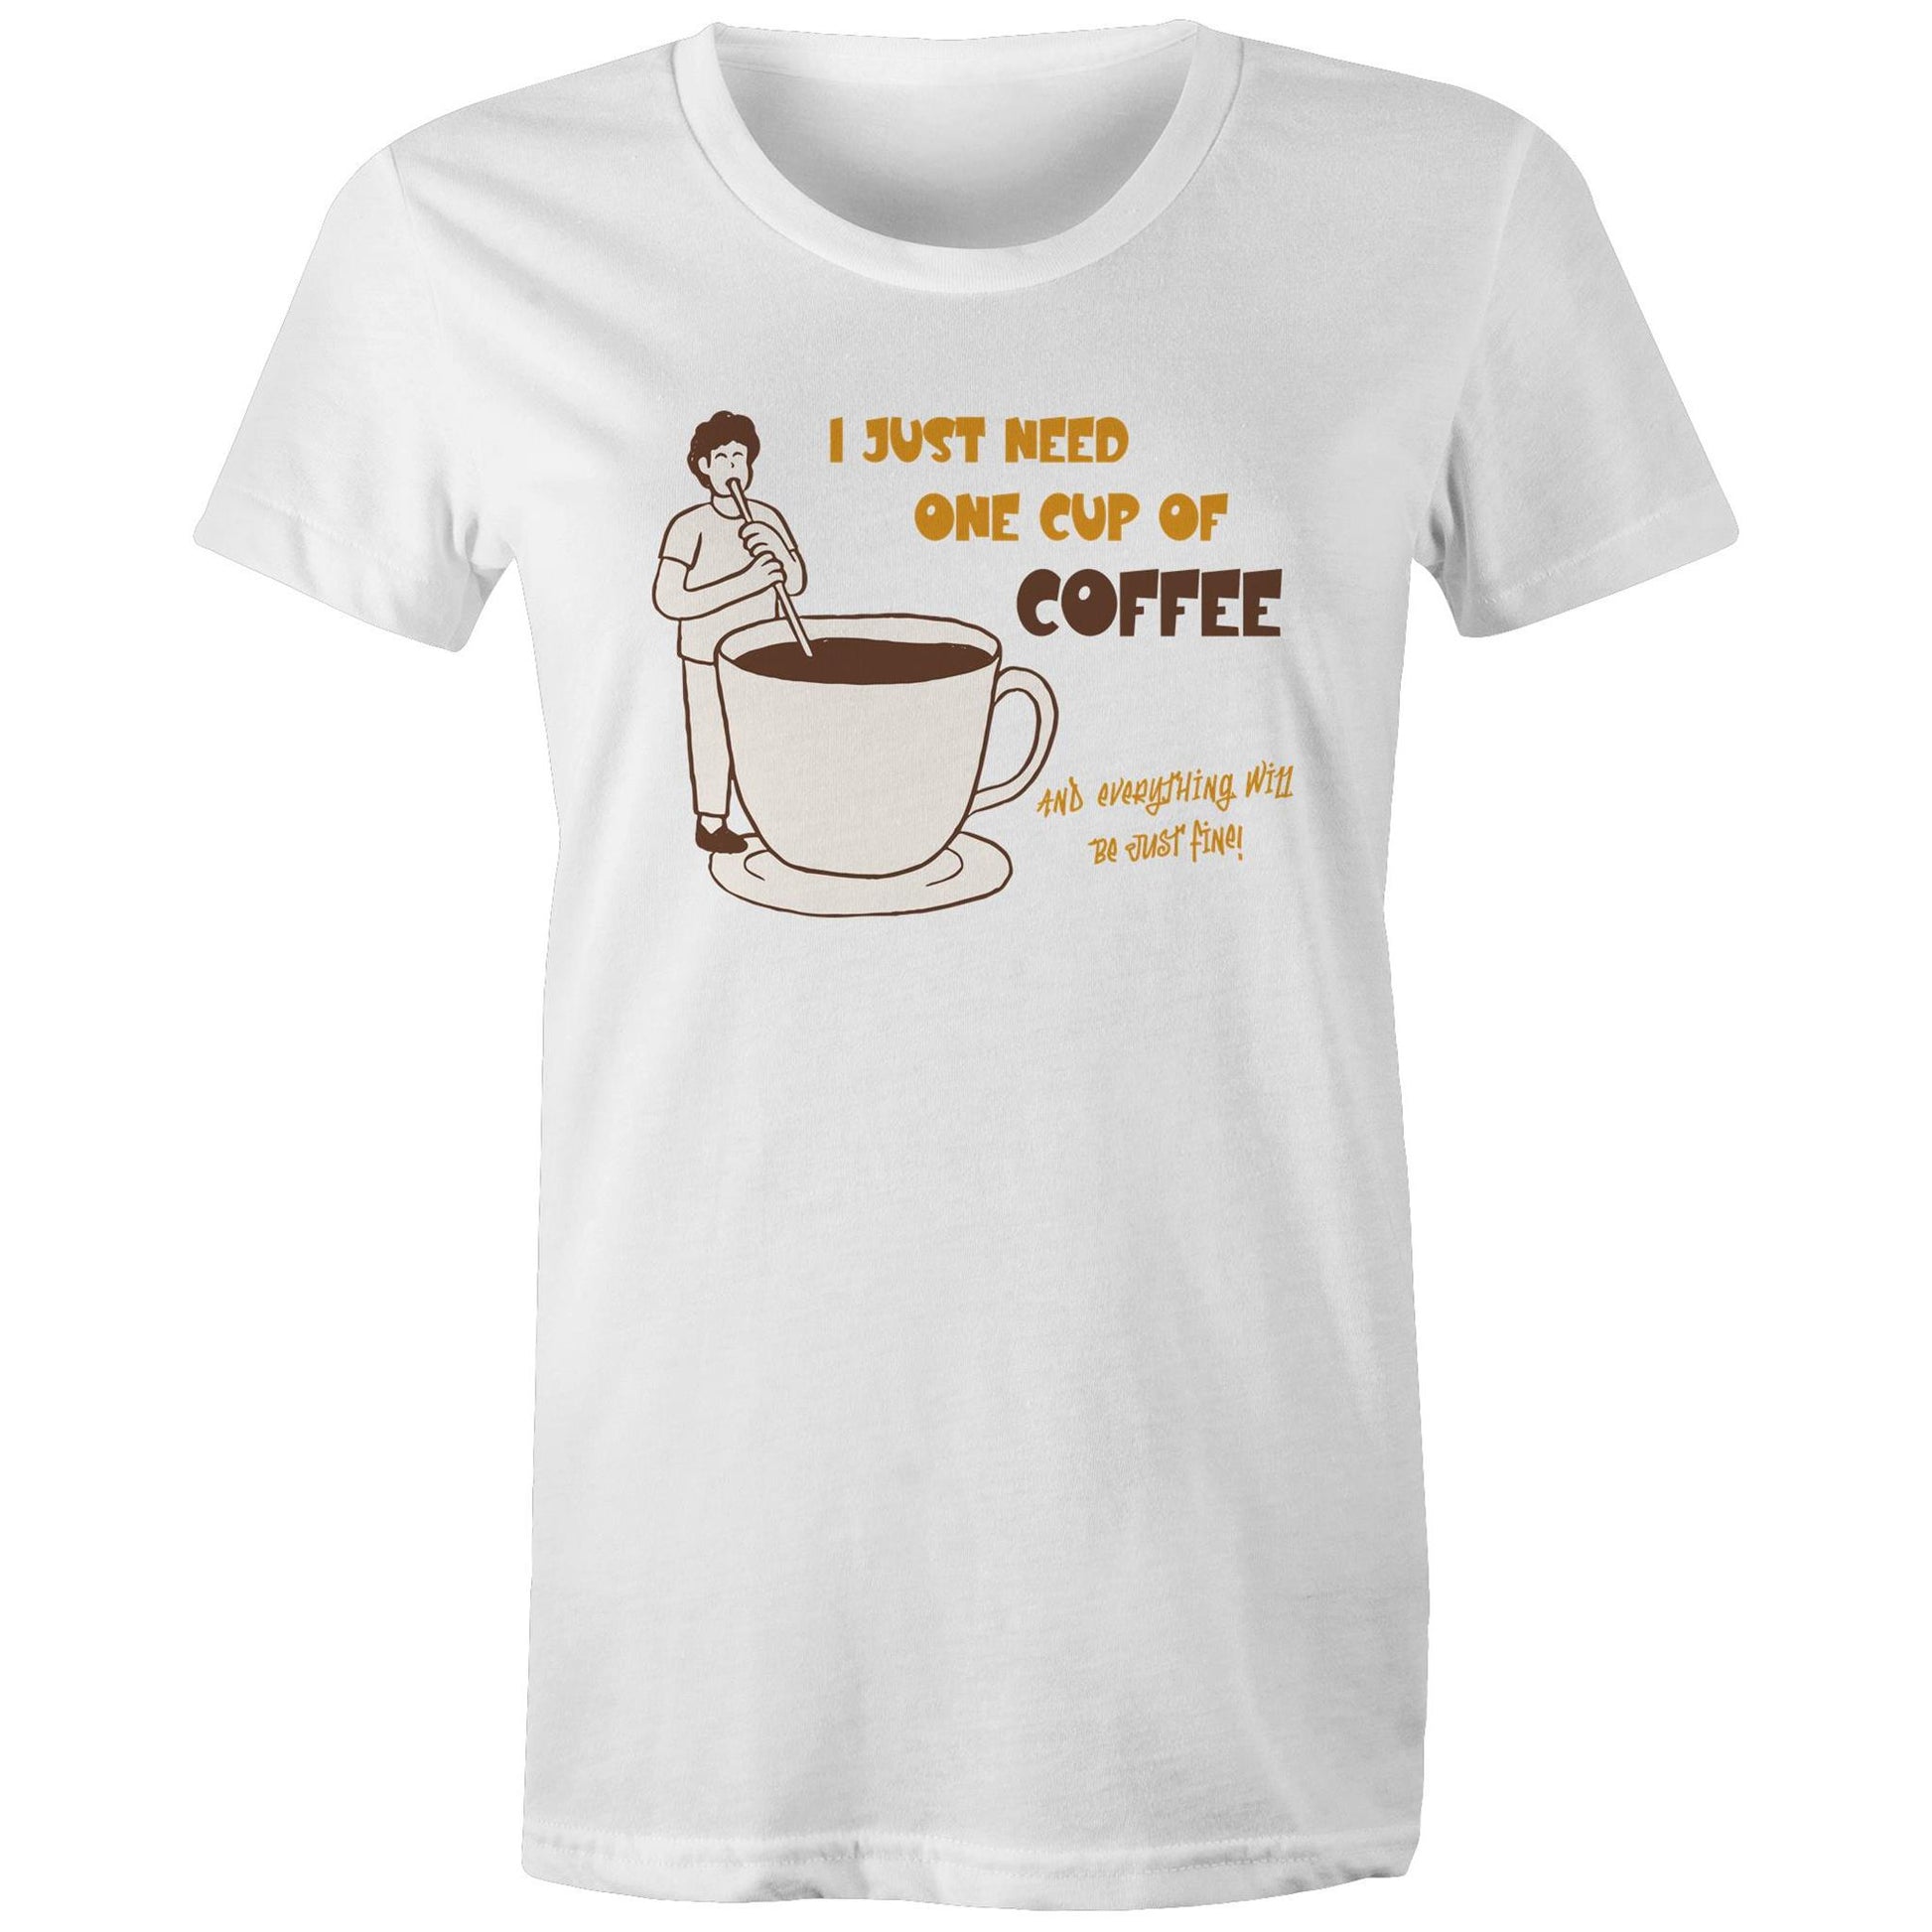 I Just Need One Cup Of Coffee And Everything Will Be Just Fine - Womens T-shirt White Womens T-shirt Coffee